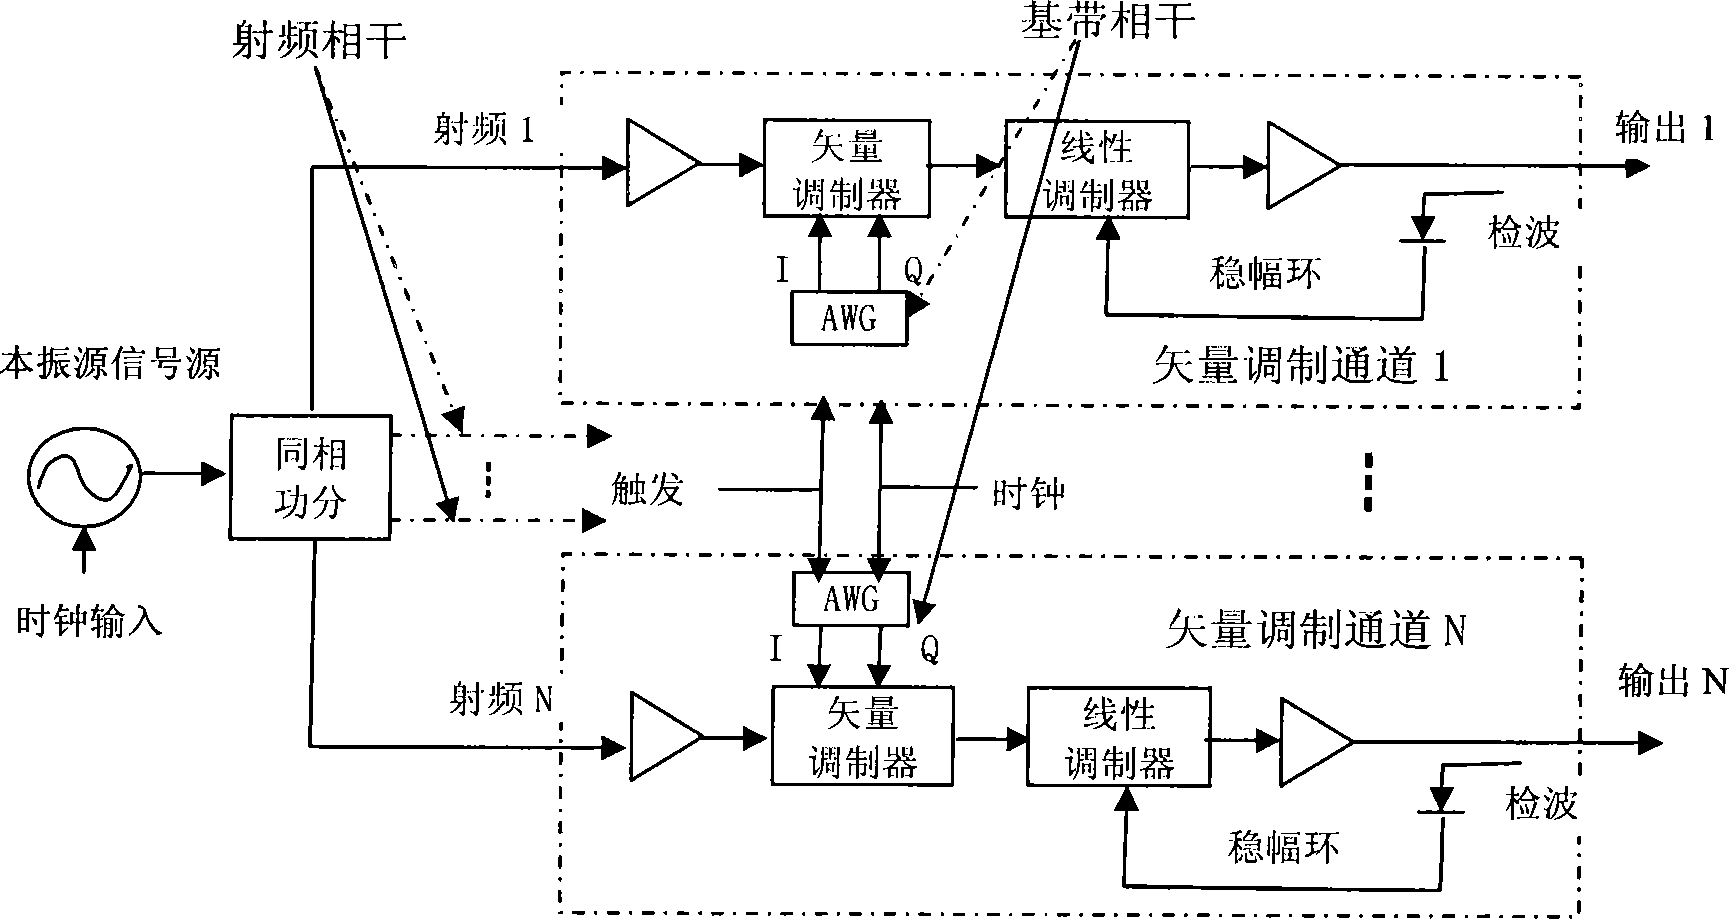 Modularization phase coherent multichannel signal generating device based on PXI bus